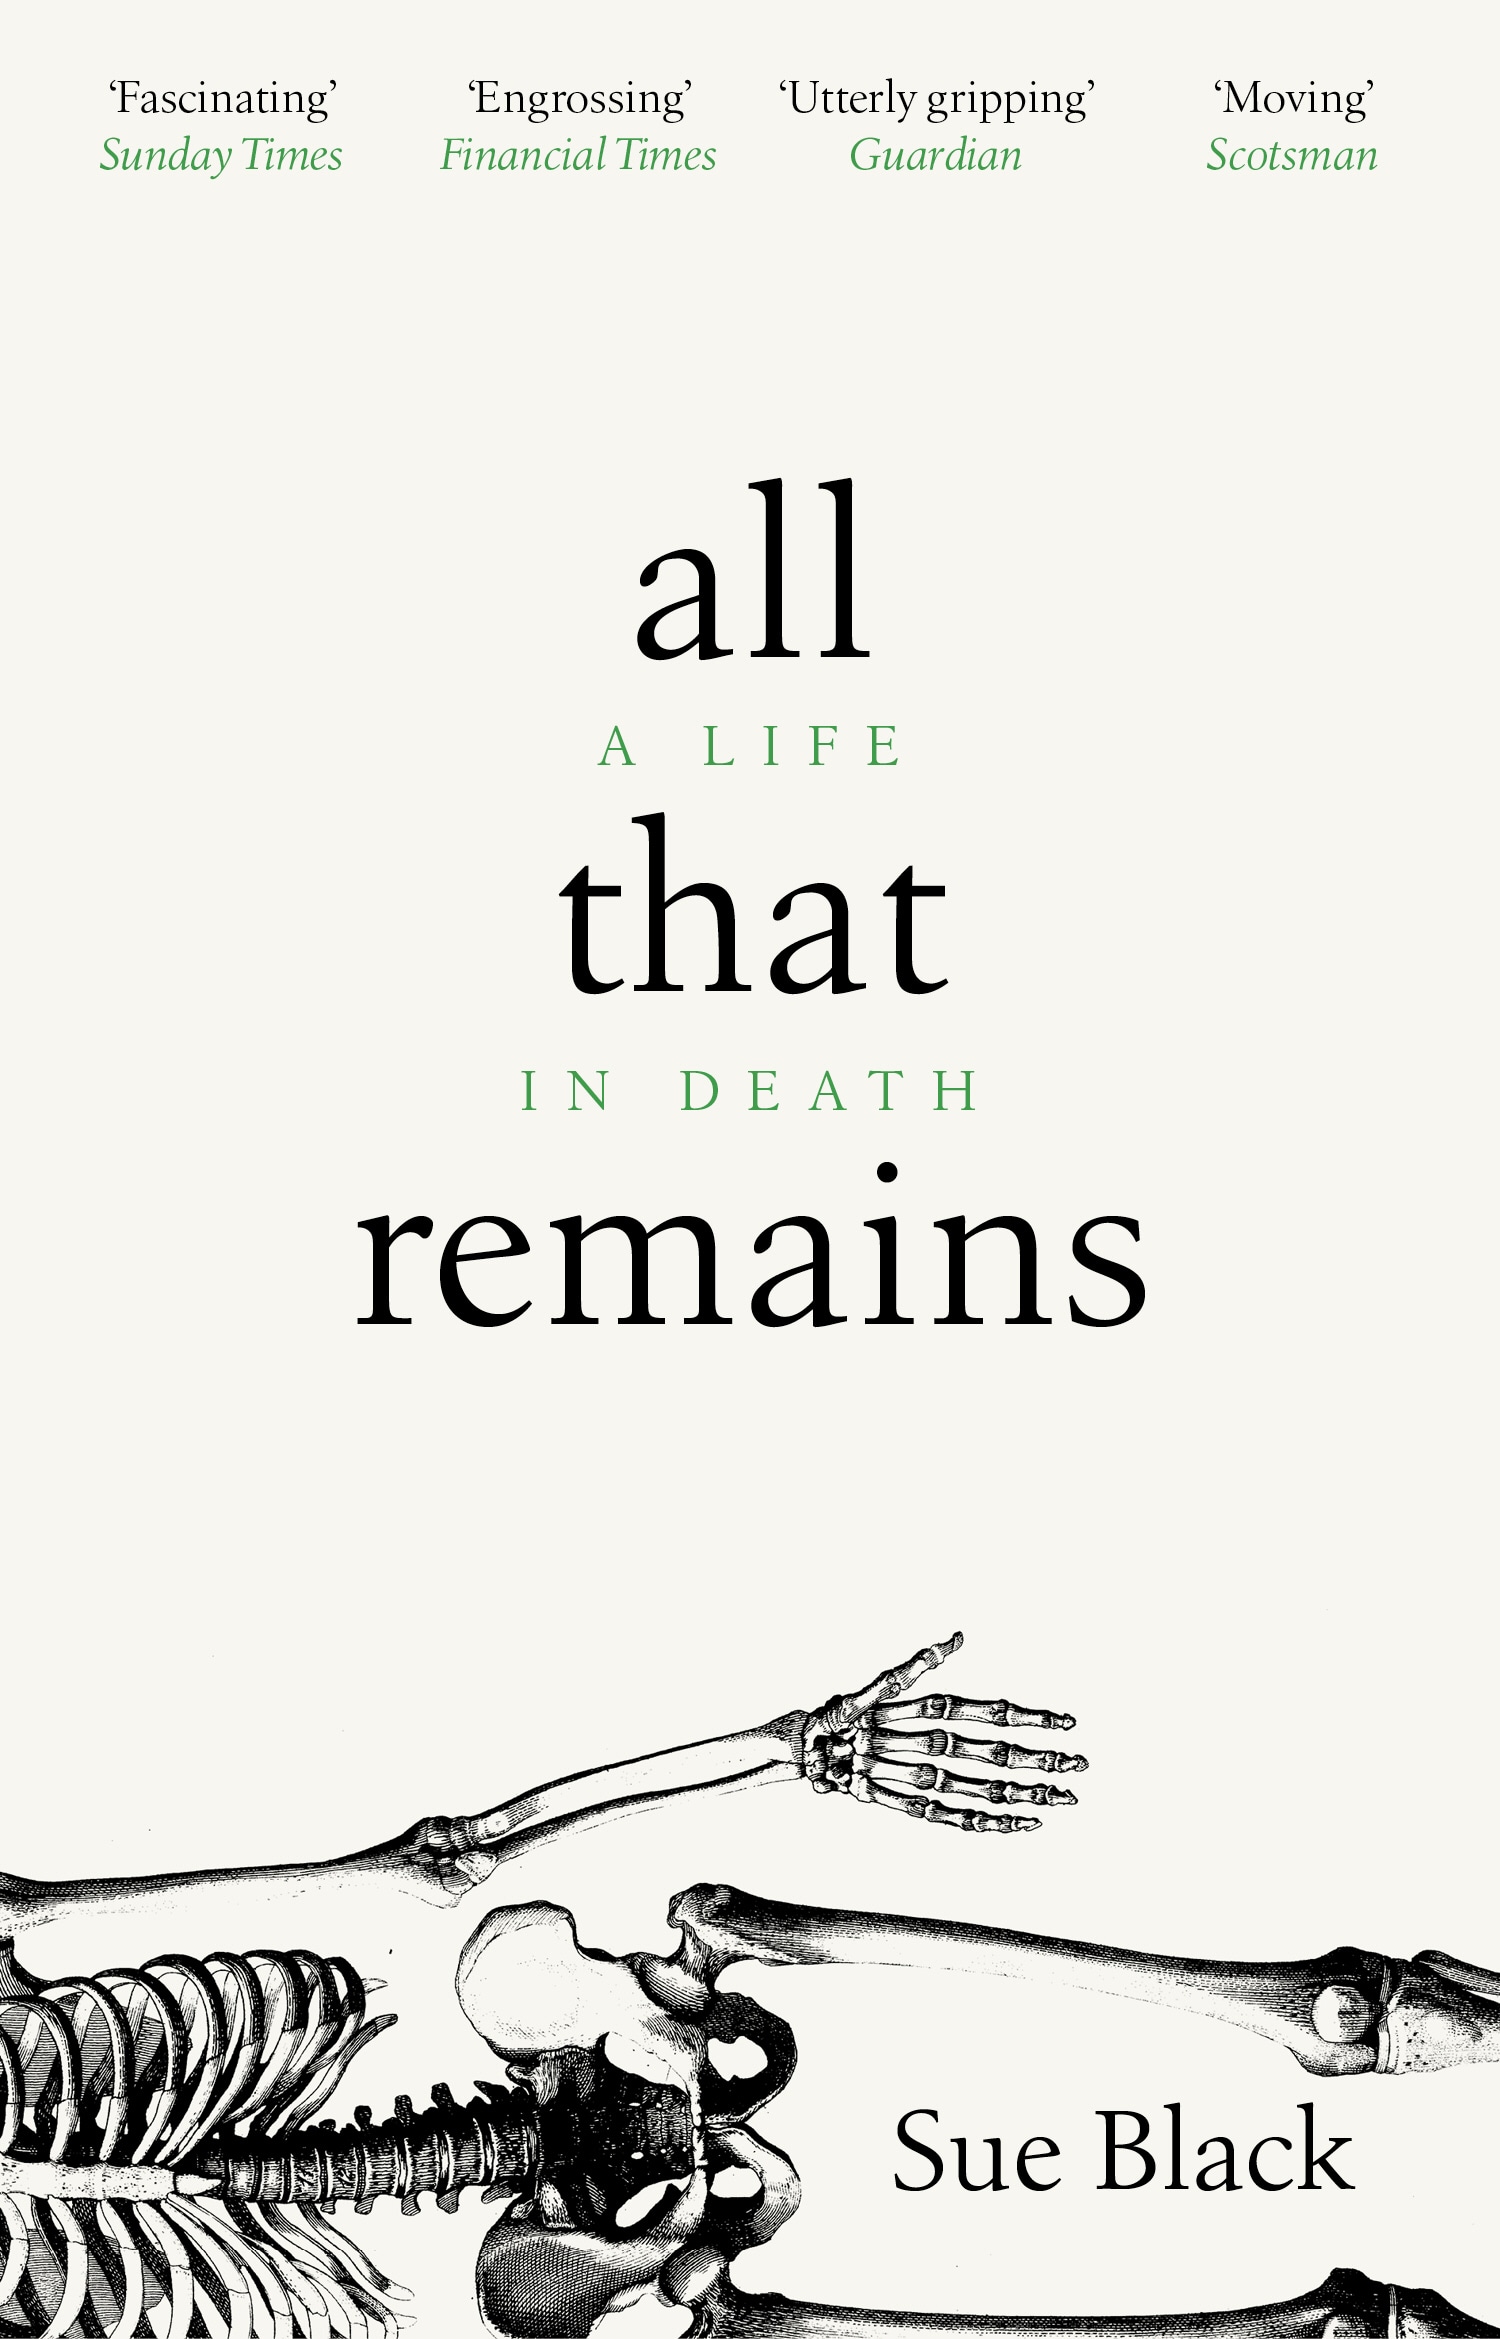 Book “All That Remains” by Sue Black — March 7, 2019